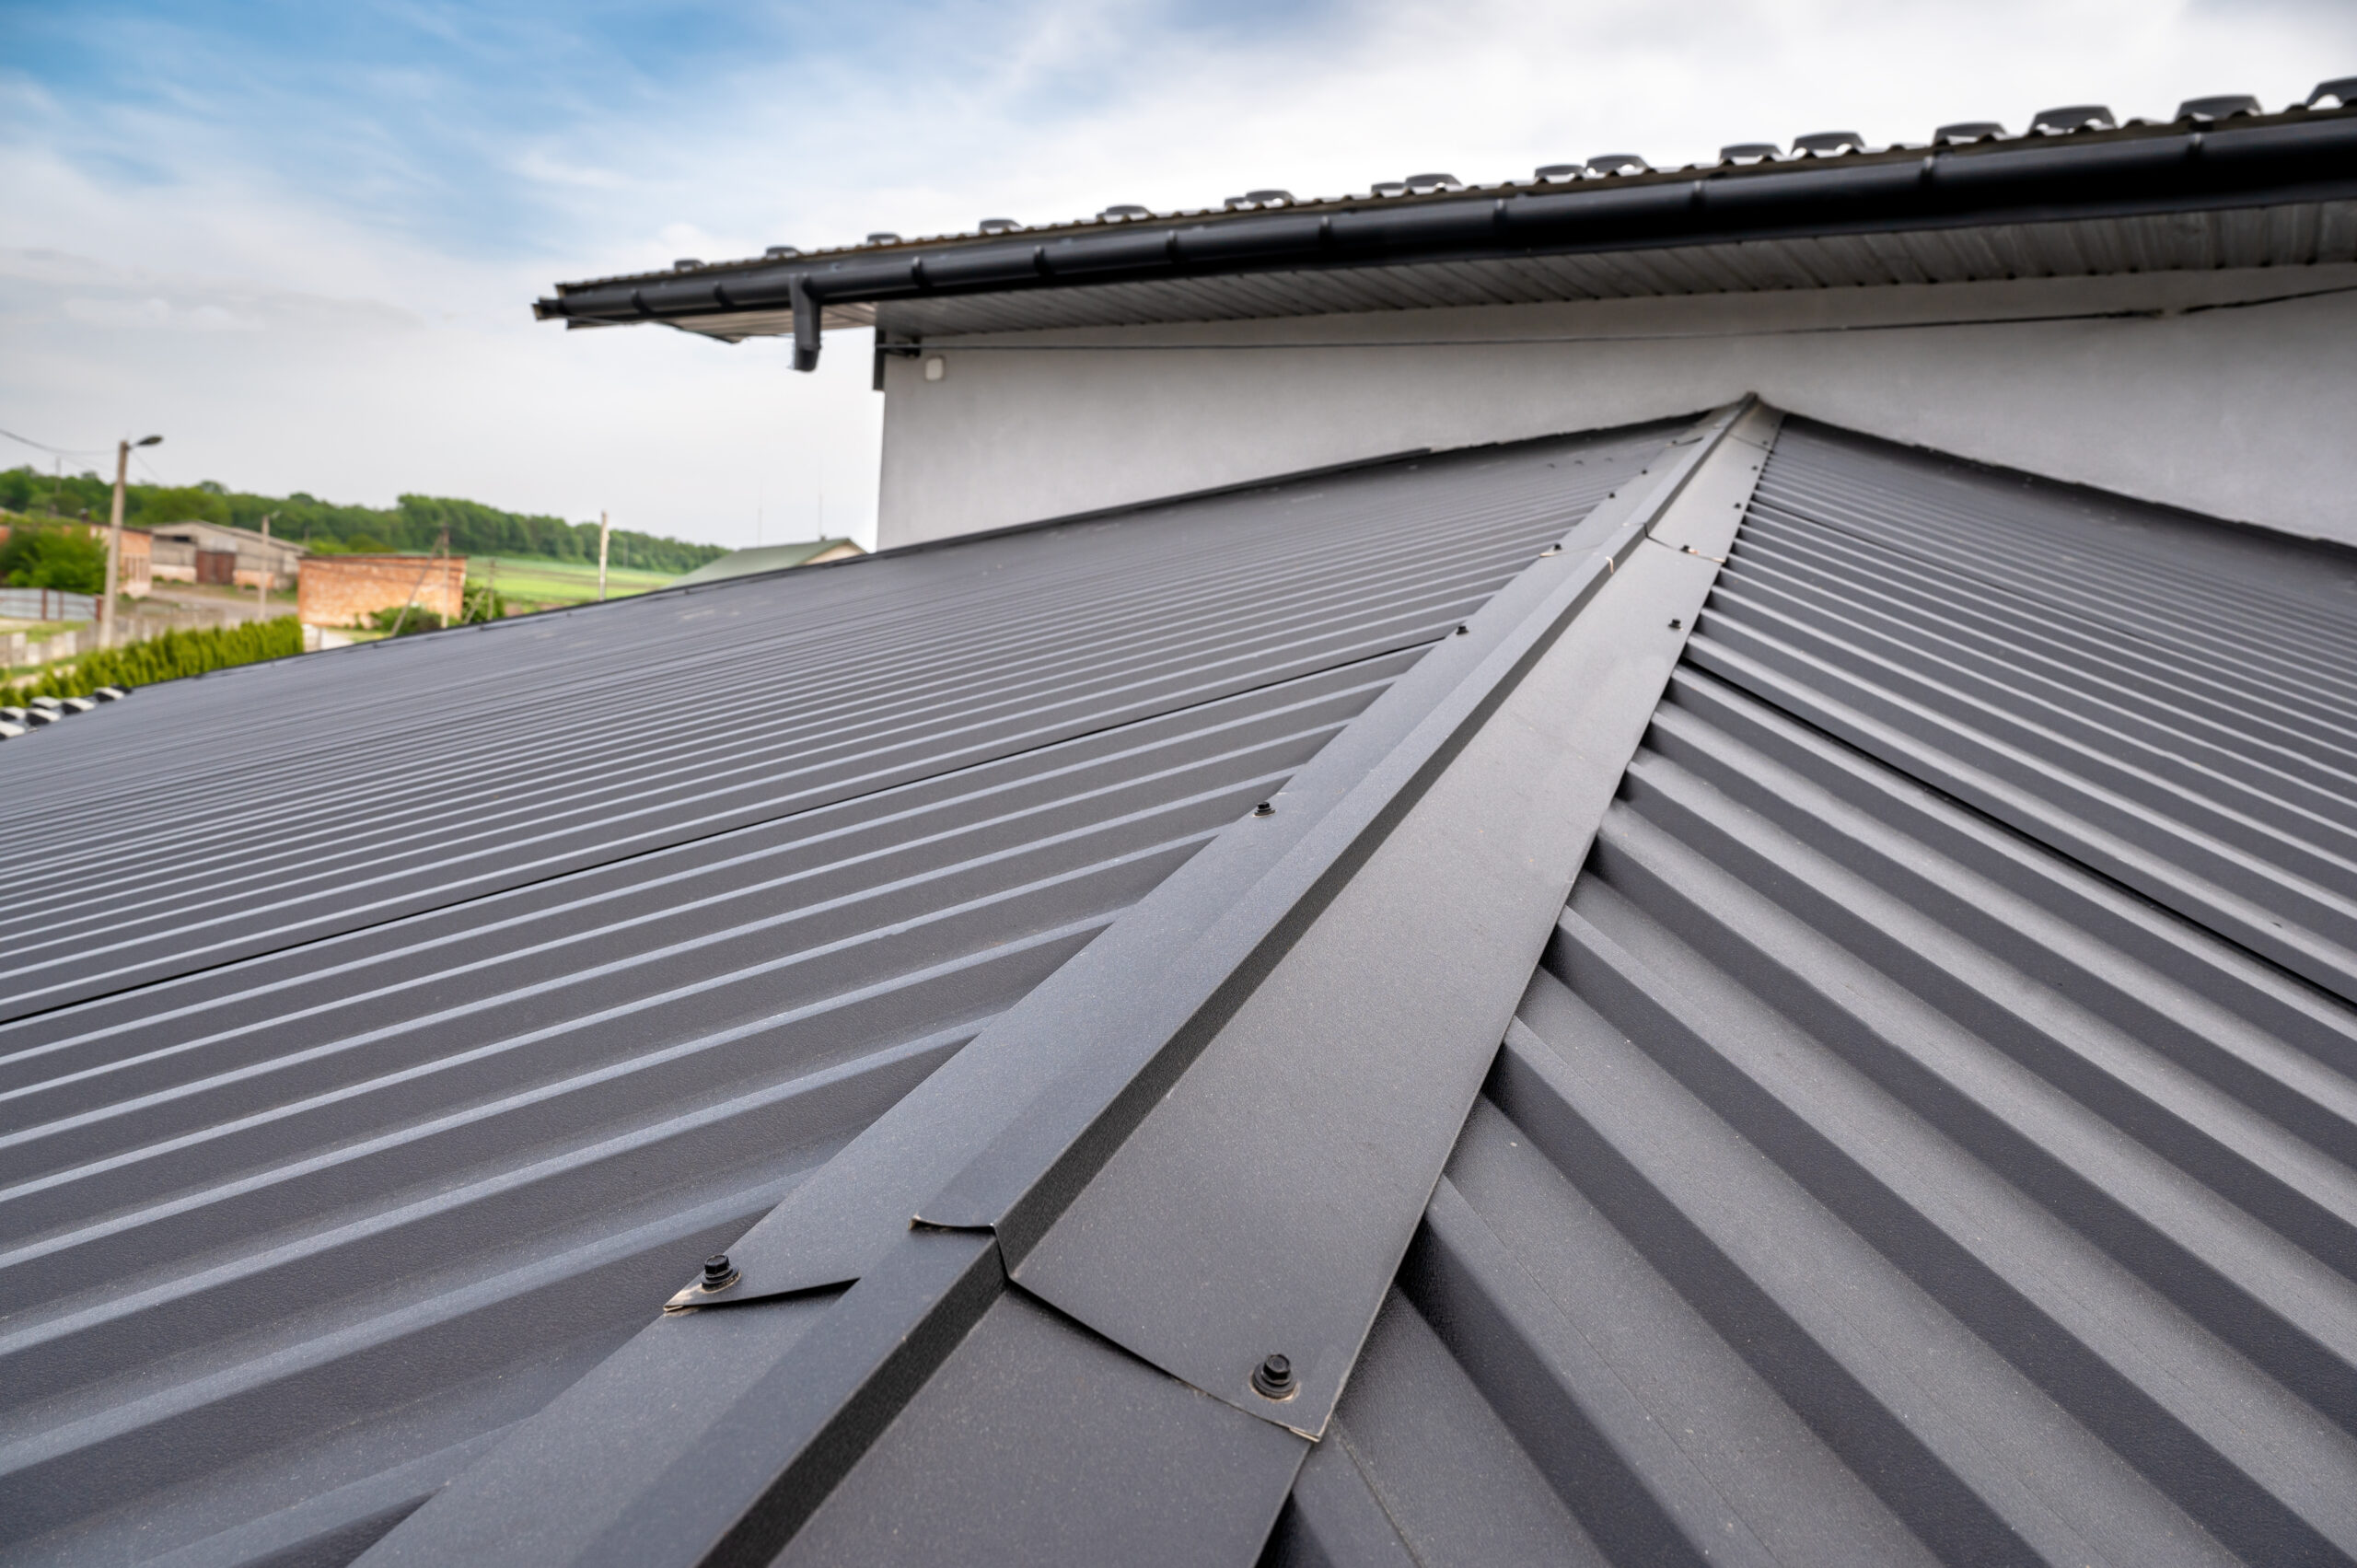 A close-up image a metal roofing system, showing a gutter on the side of the house